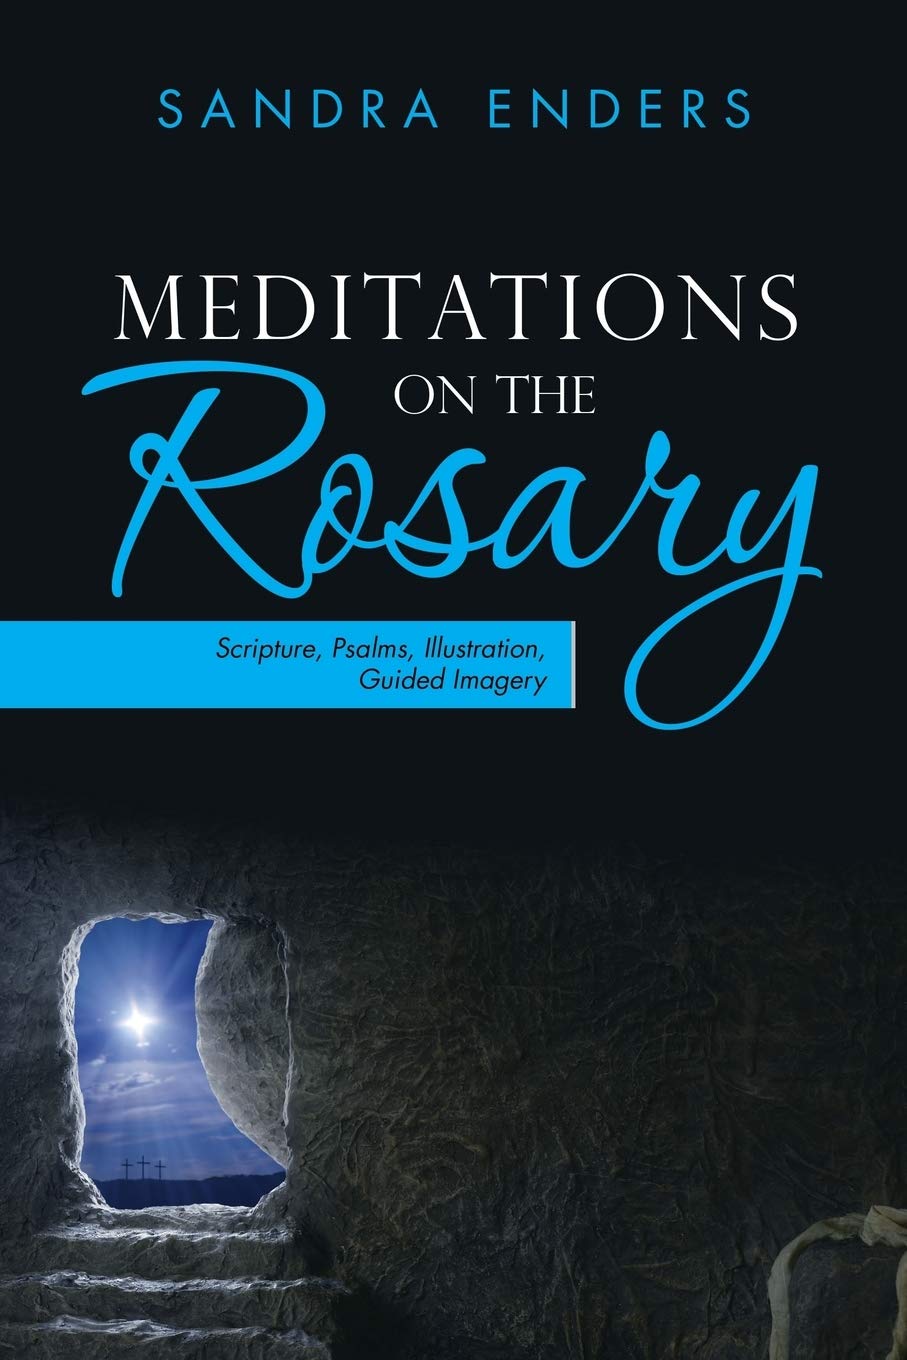 Sandra Enders Engages Author’s Tranquility Press to Promote Meditations on the Rosary